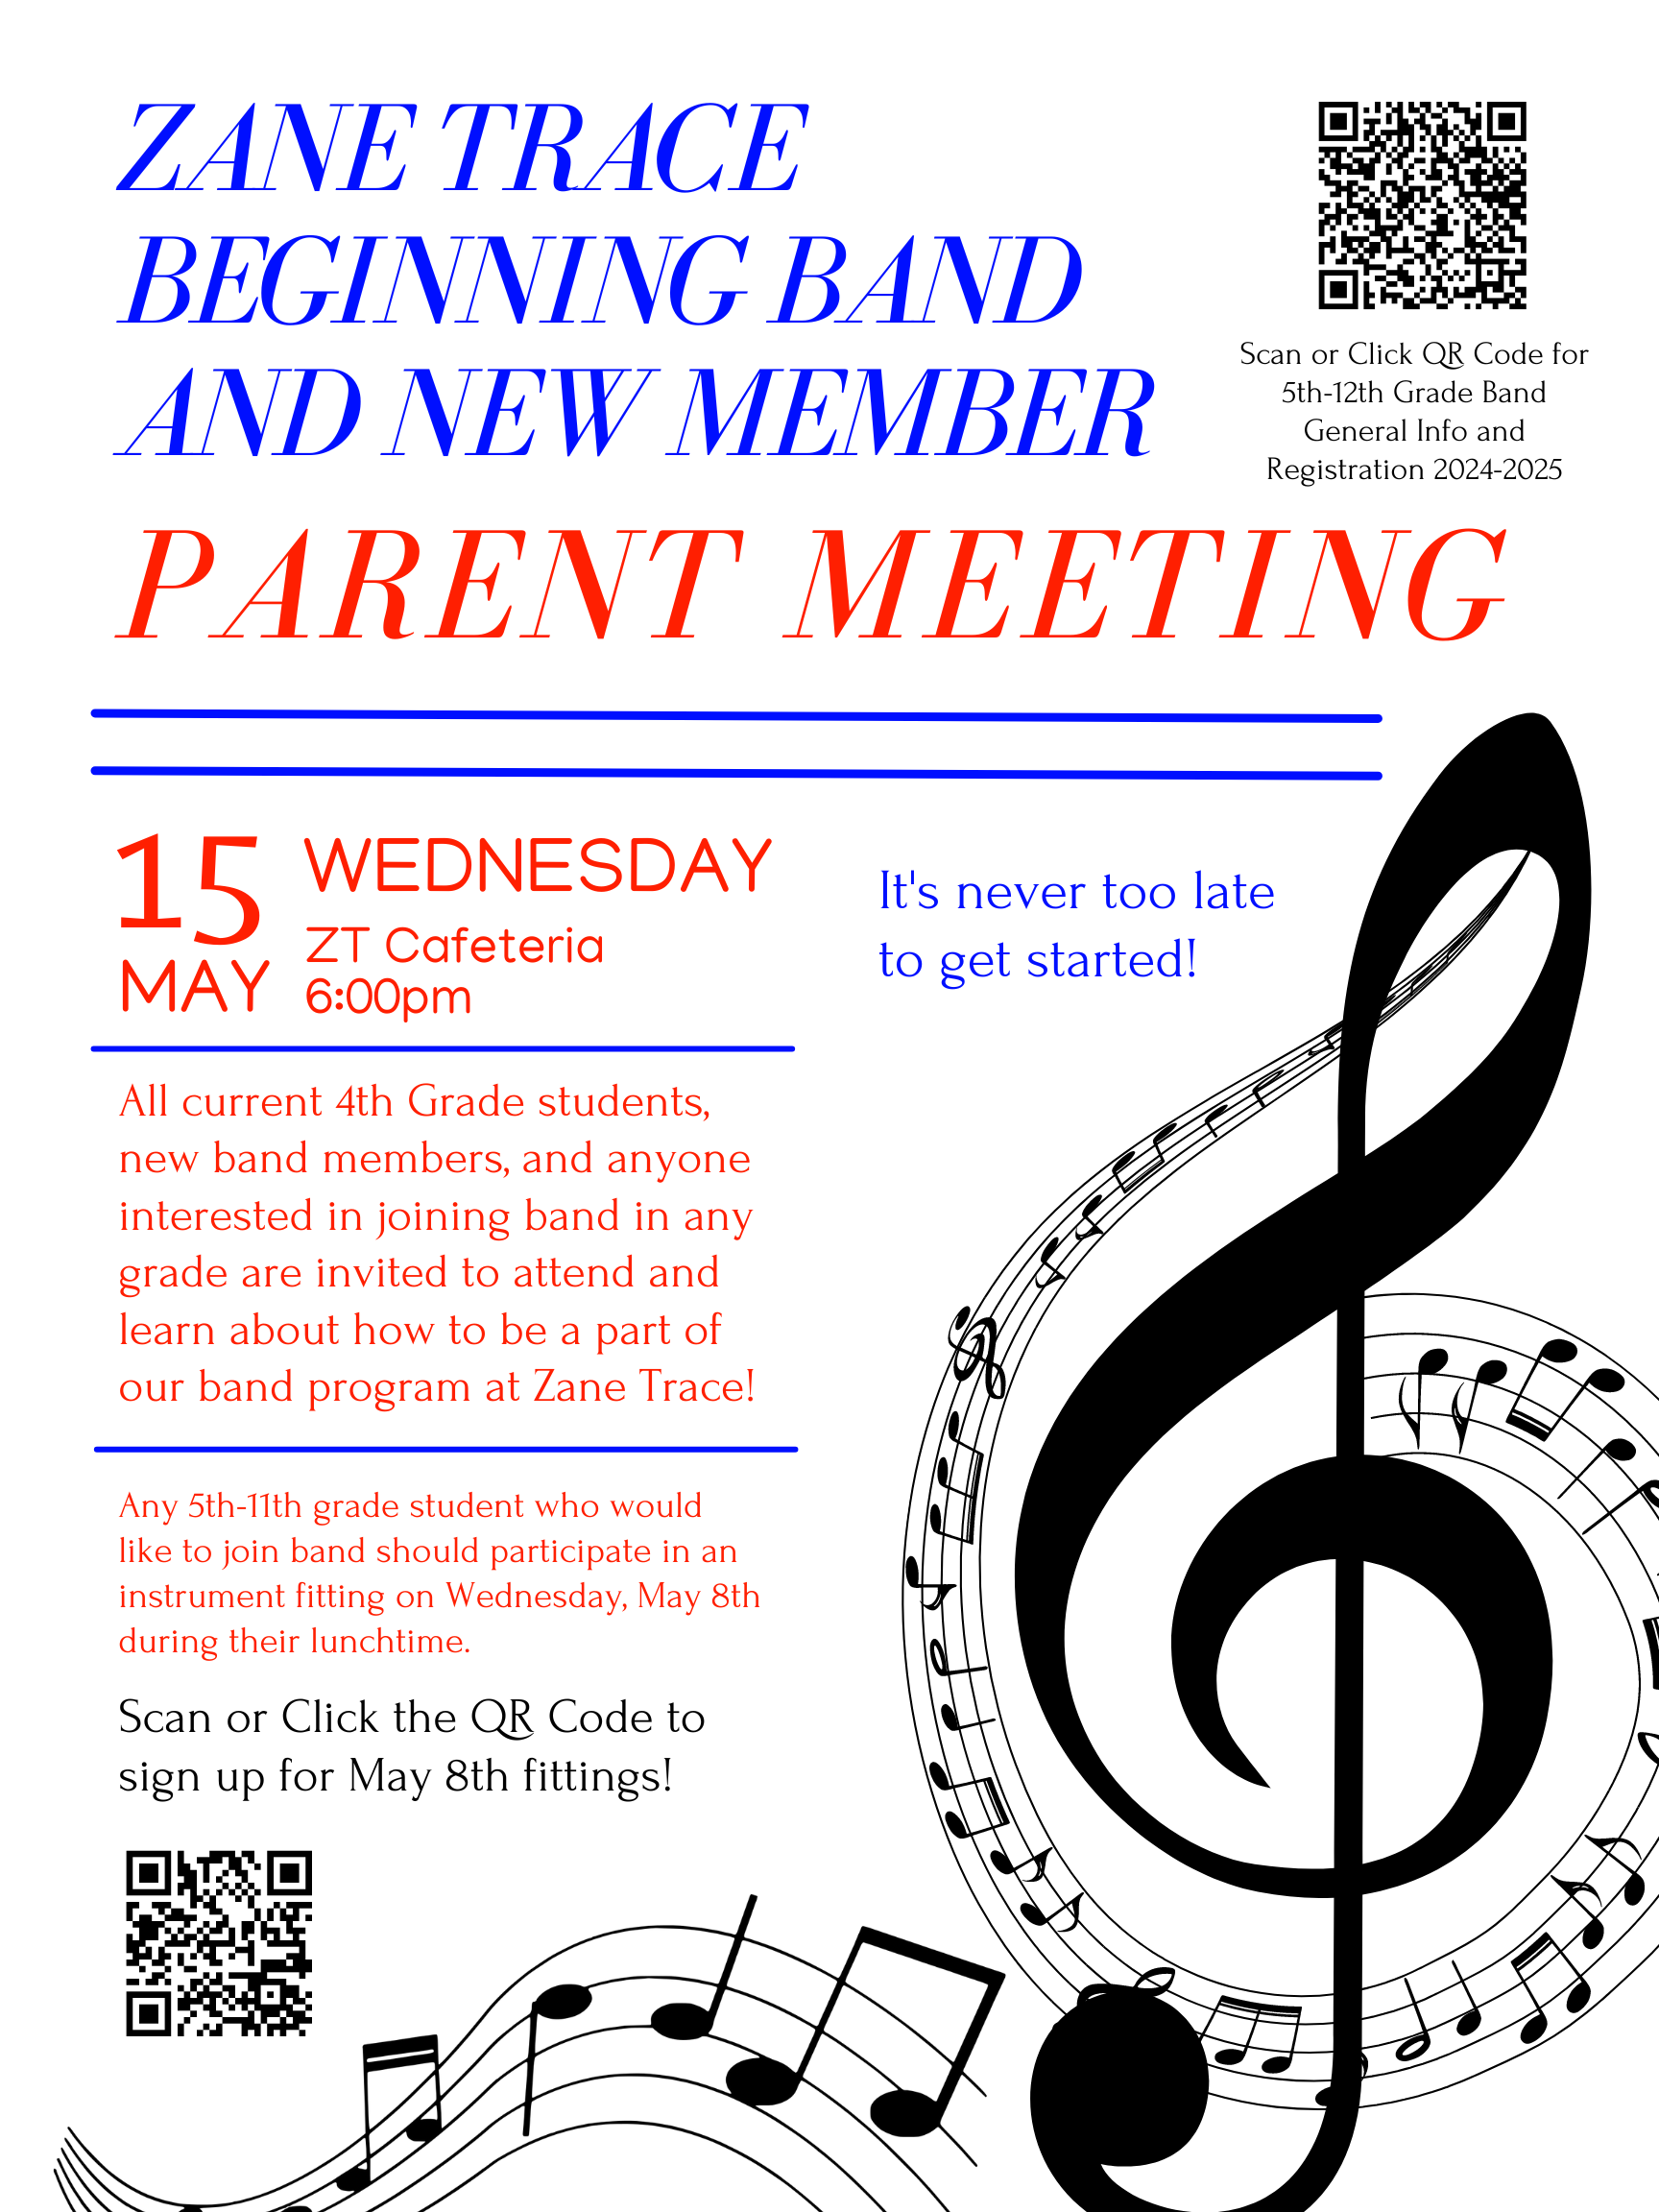 Beginning Band and New Member Parent Meeting Flyer